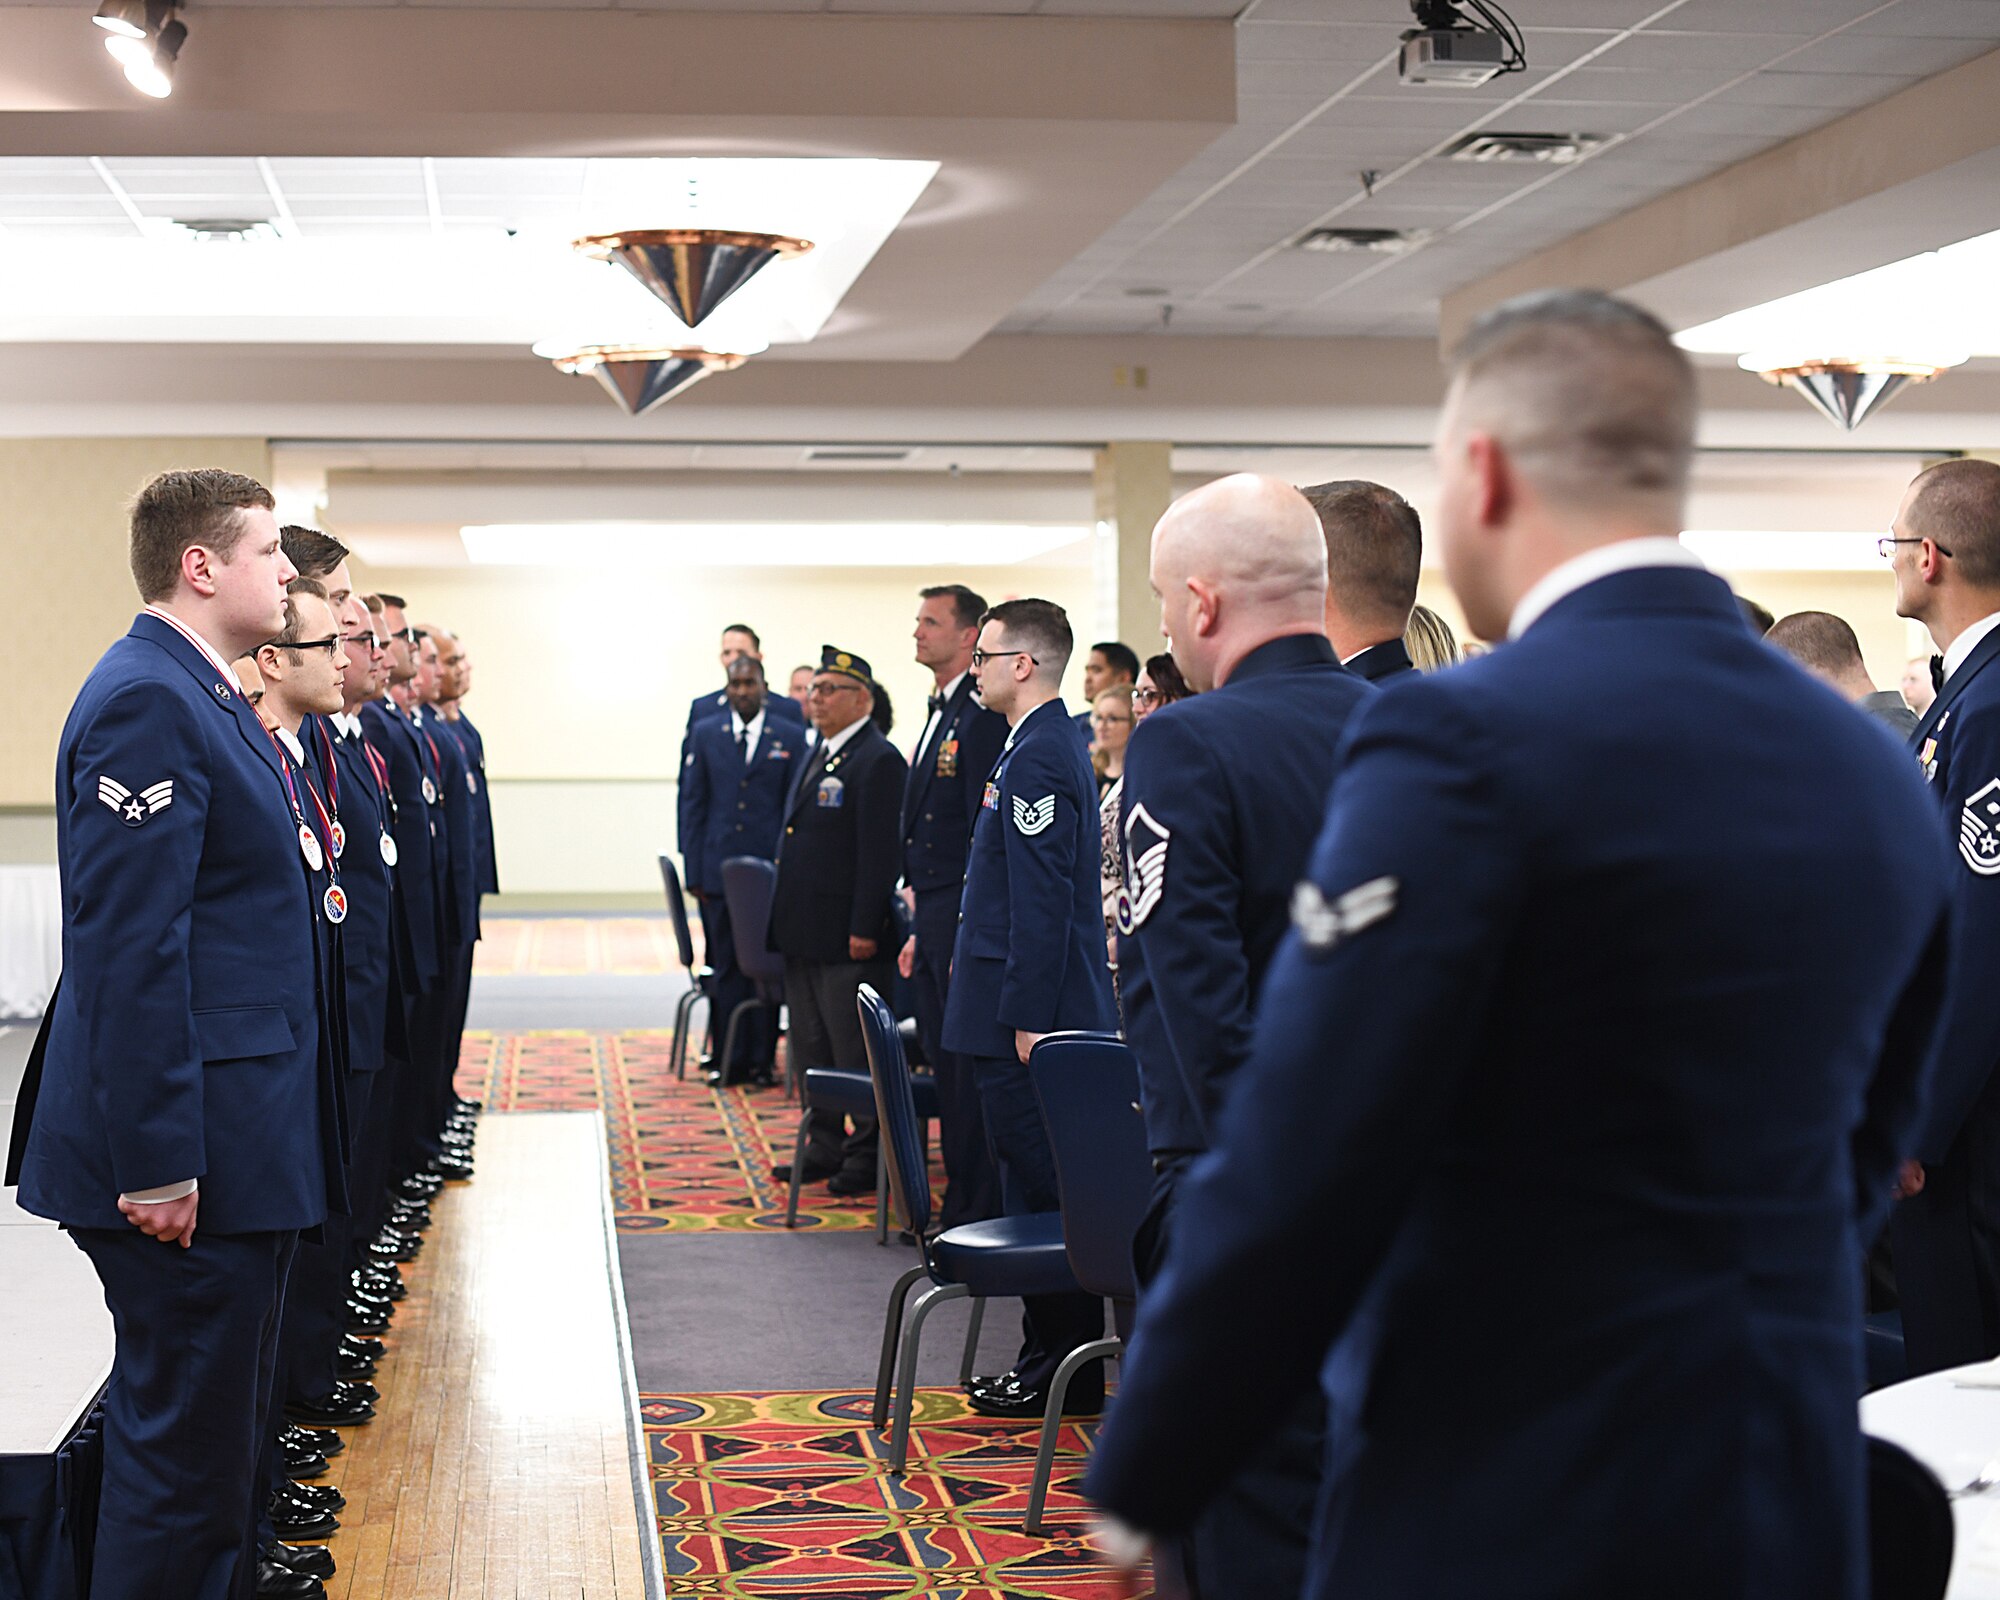 Etchberger Airman Leadership School graduates line up to be recognized at the conclusion of the ALS graduation ceremony, June 20, 2019, on Grand Forks Air Force Base, North Dakota. ALS graduation is the culmination of the first level of the Enlisted Professional Military Education continuum directed toward preparing upcoming noncommissioned officers with leadership skills for their careers. (U.S. Air Force photo by Senior Airman Elijaih Tiggs)